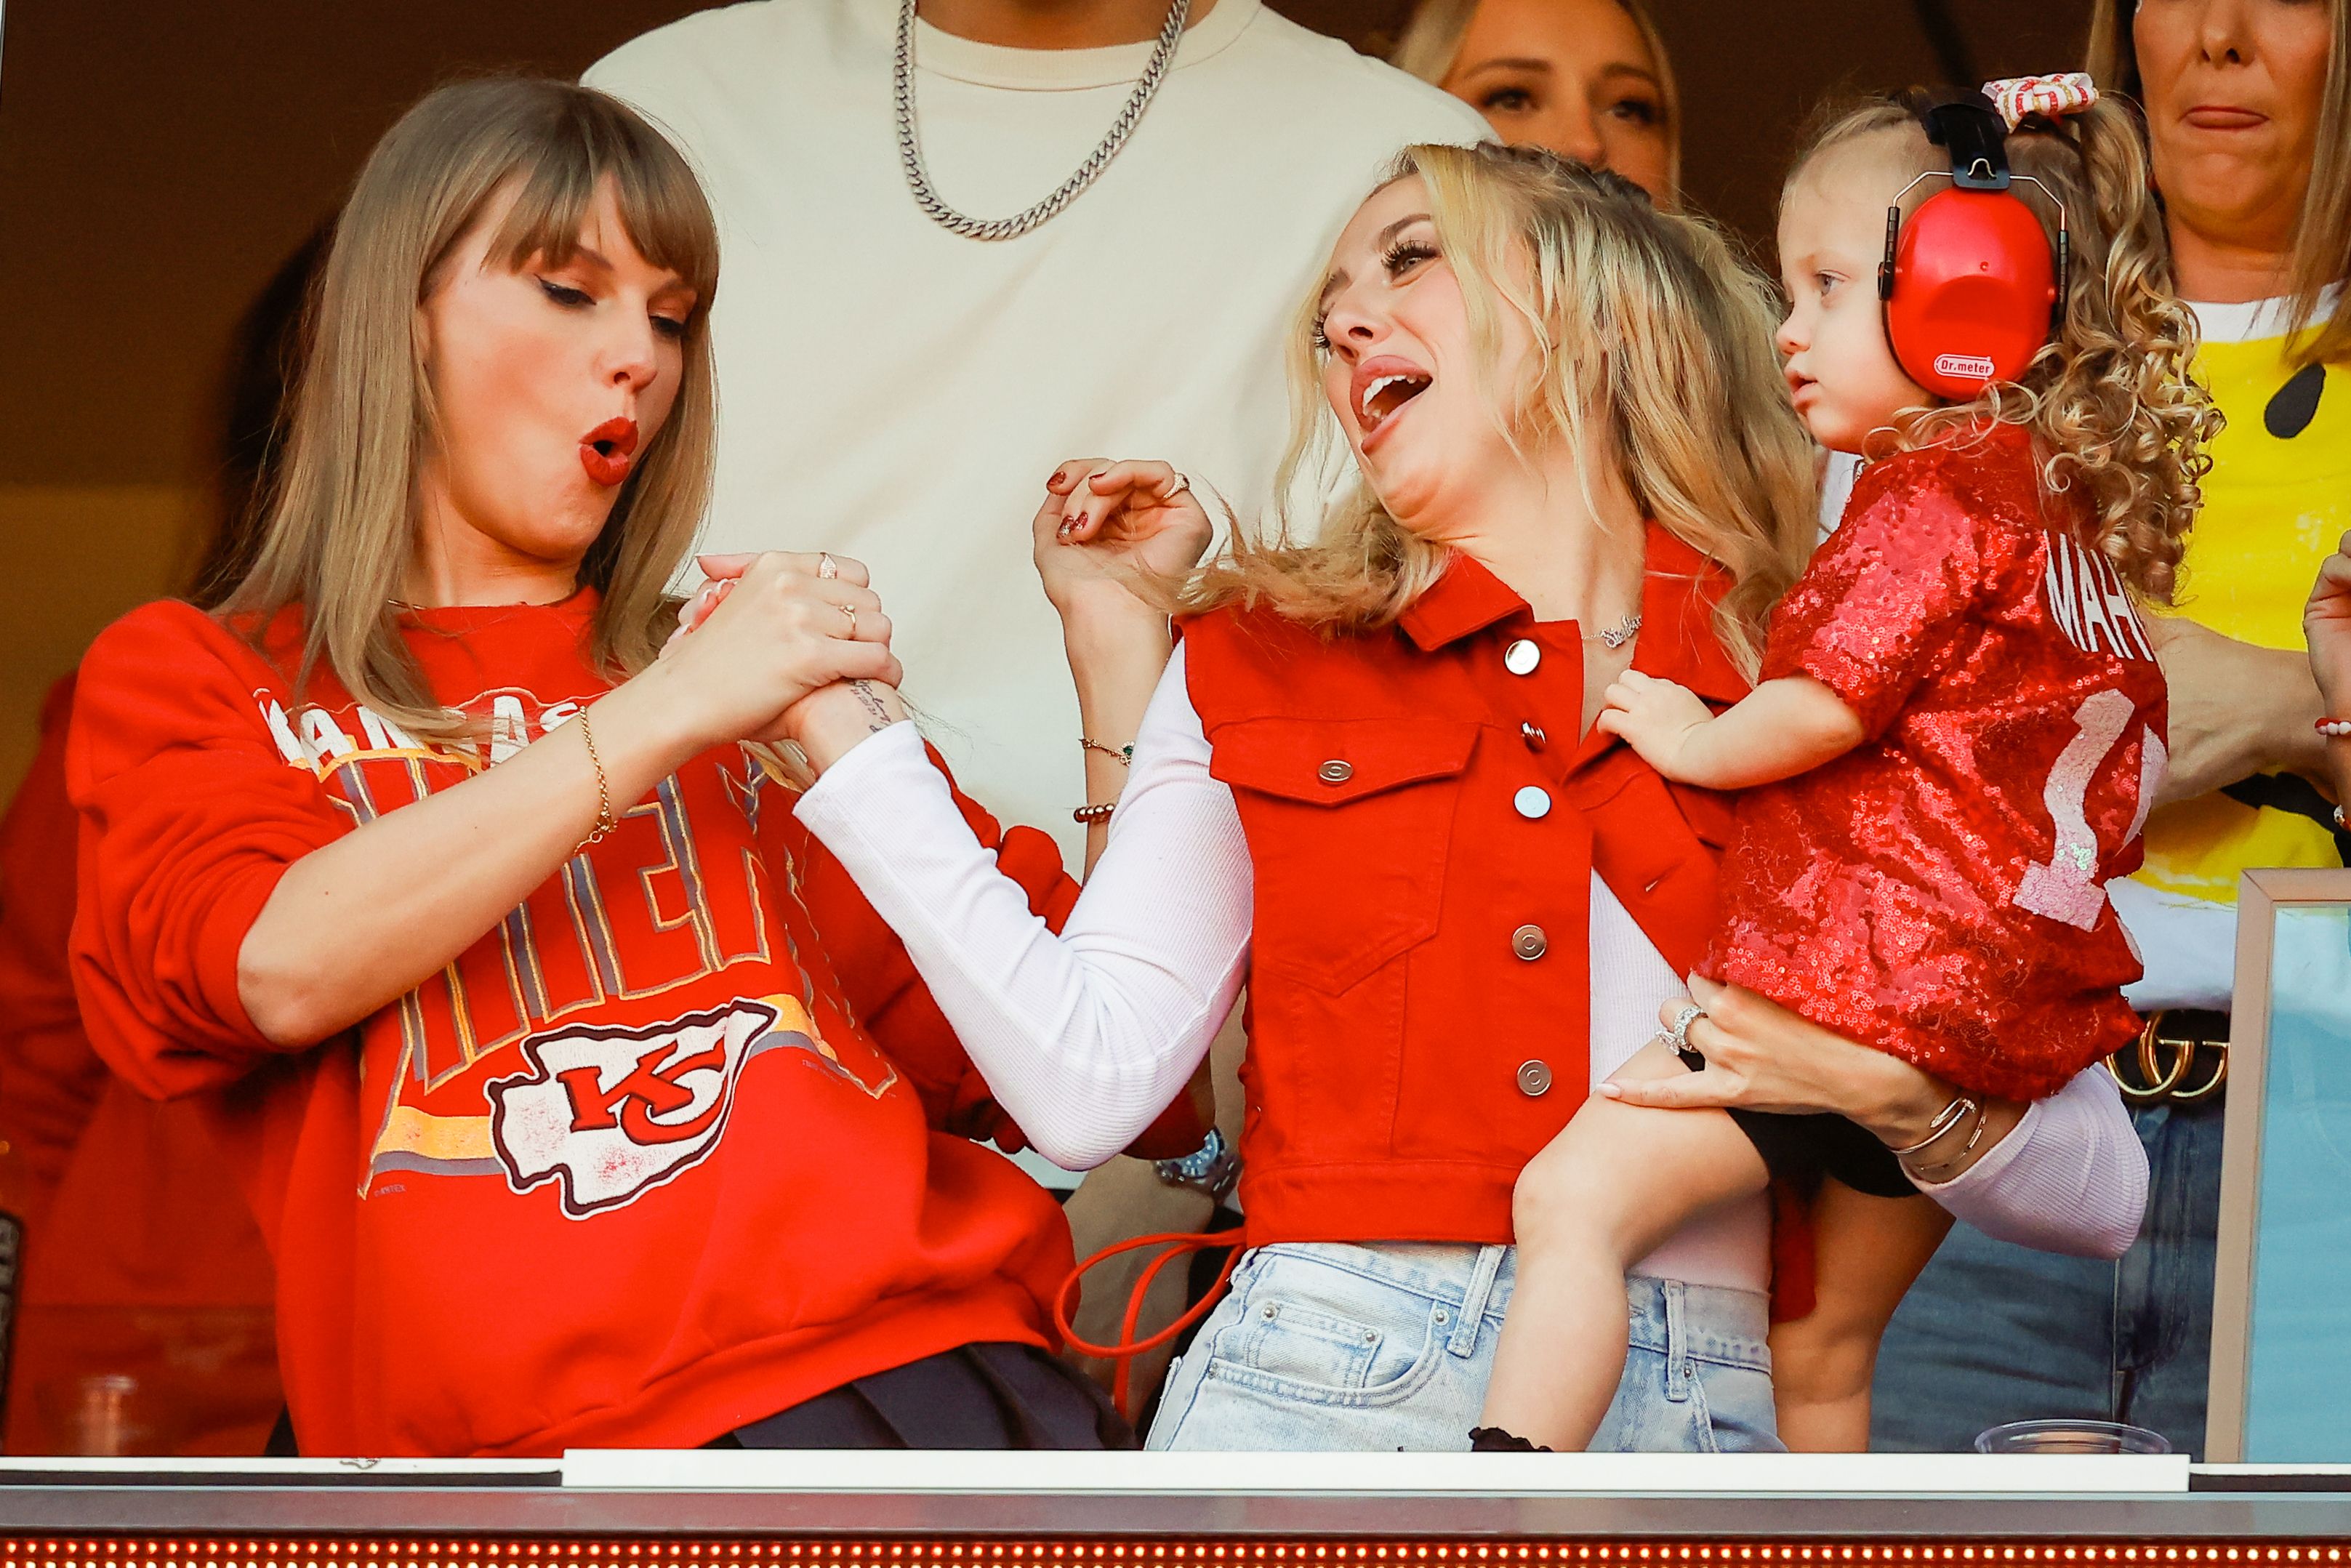 Taylor Swift and Brittany Mahomes Root for Their Guys in Matching